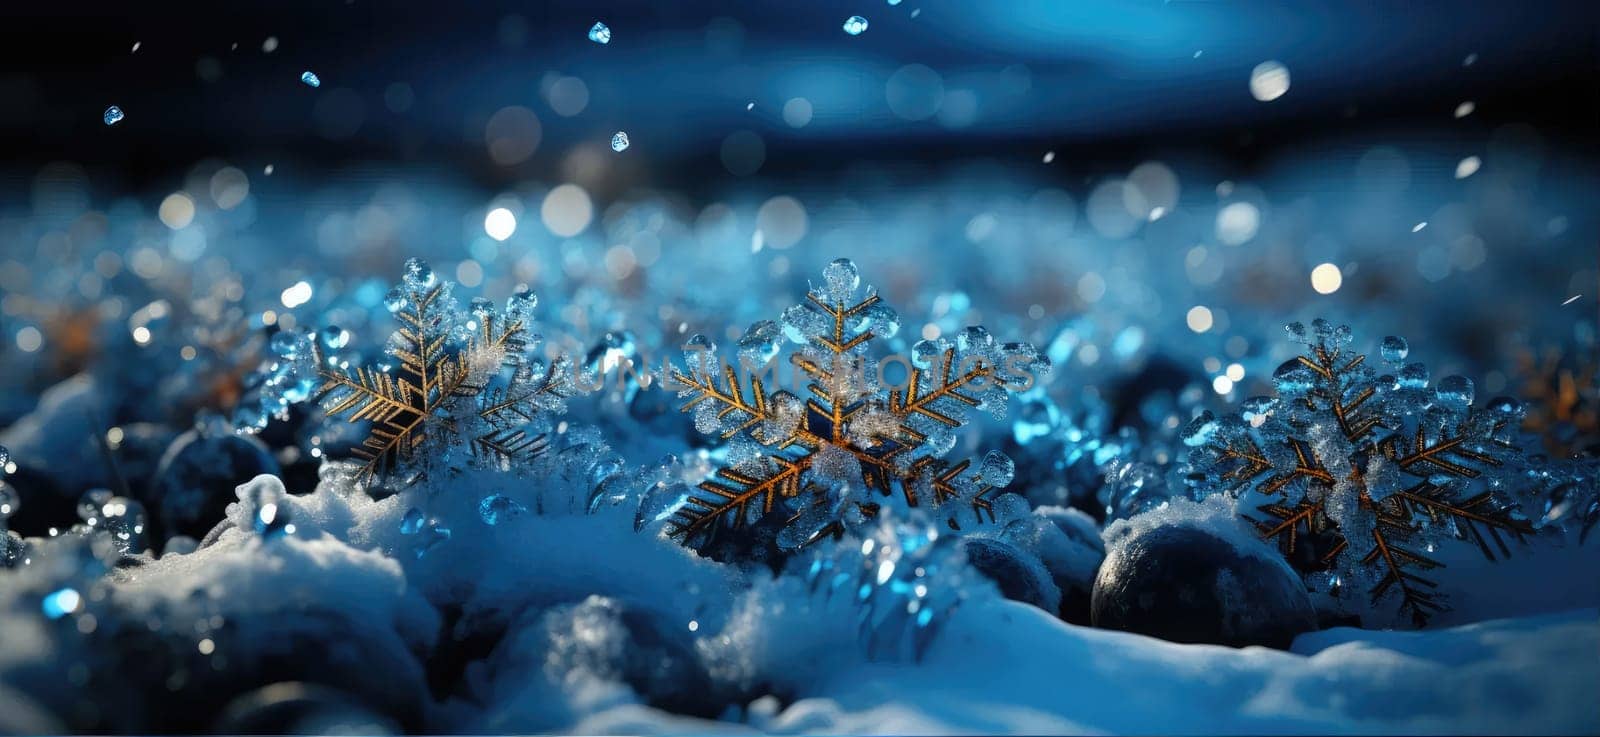 Winter magic on blue christmas background with swirling snowflakes by Yurich32